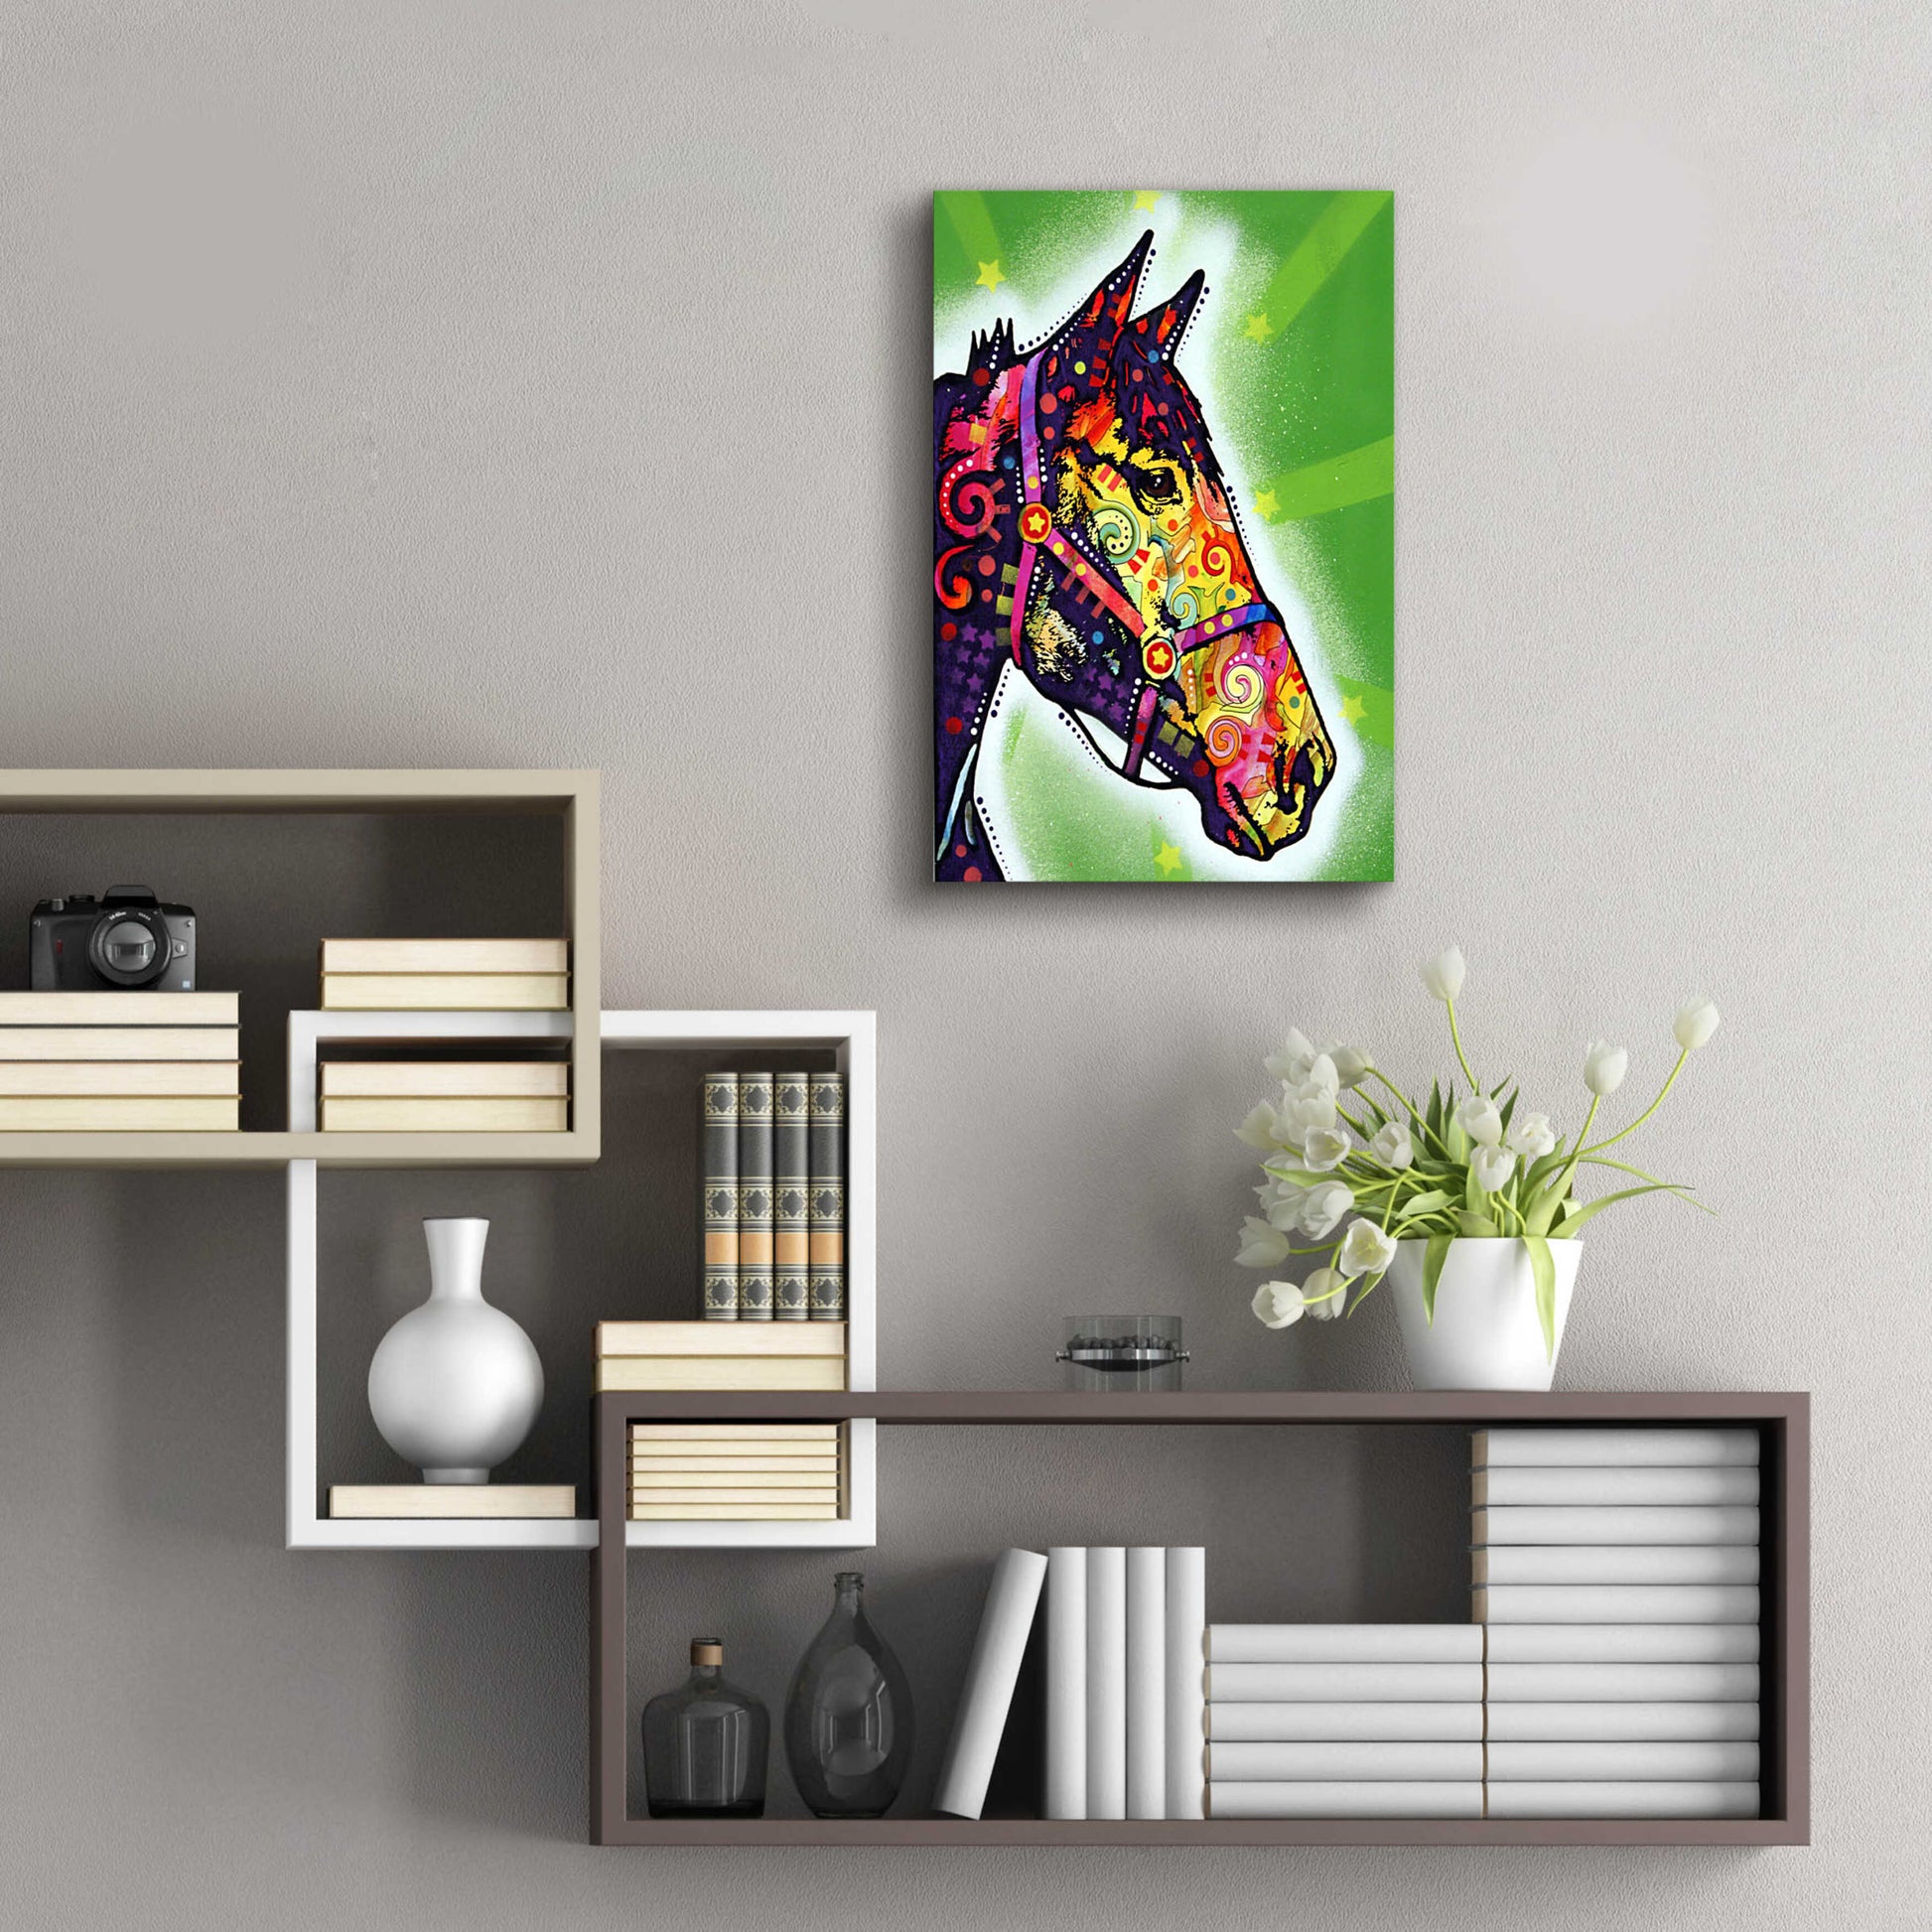 Epic Art 'Horse 2' by Dean Russo, Acrylic Glass Wall Art,16x24